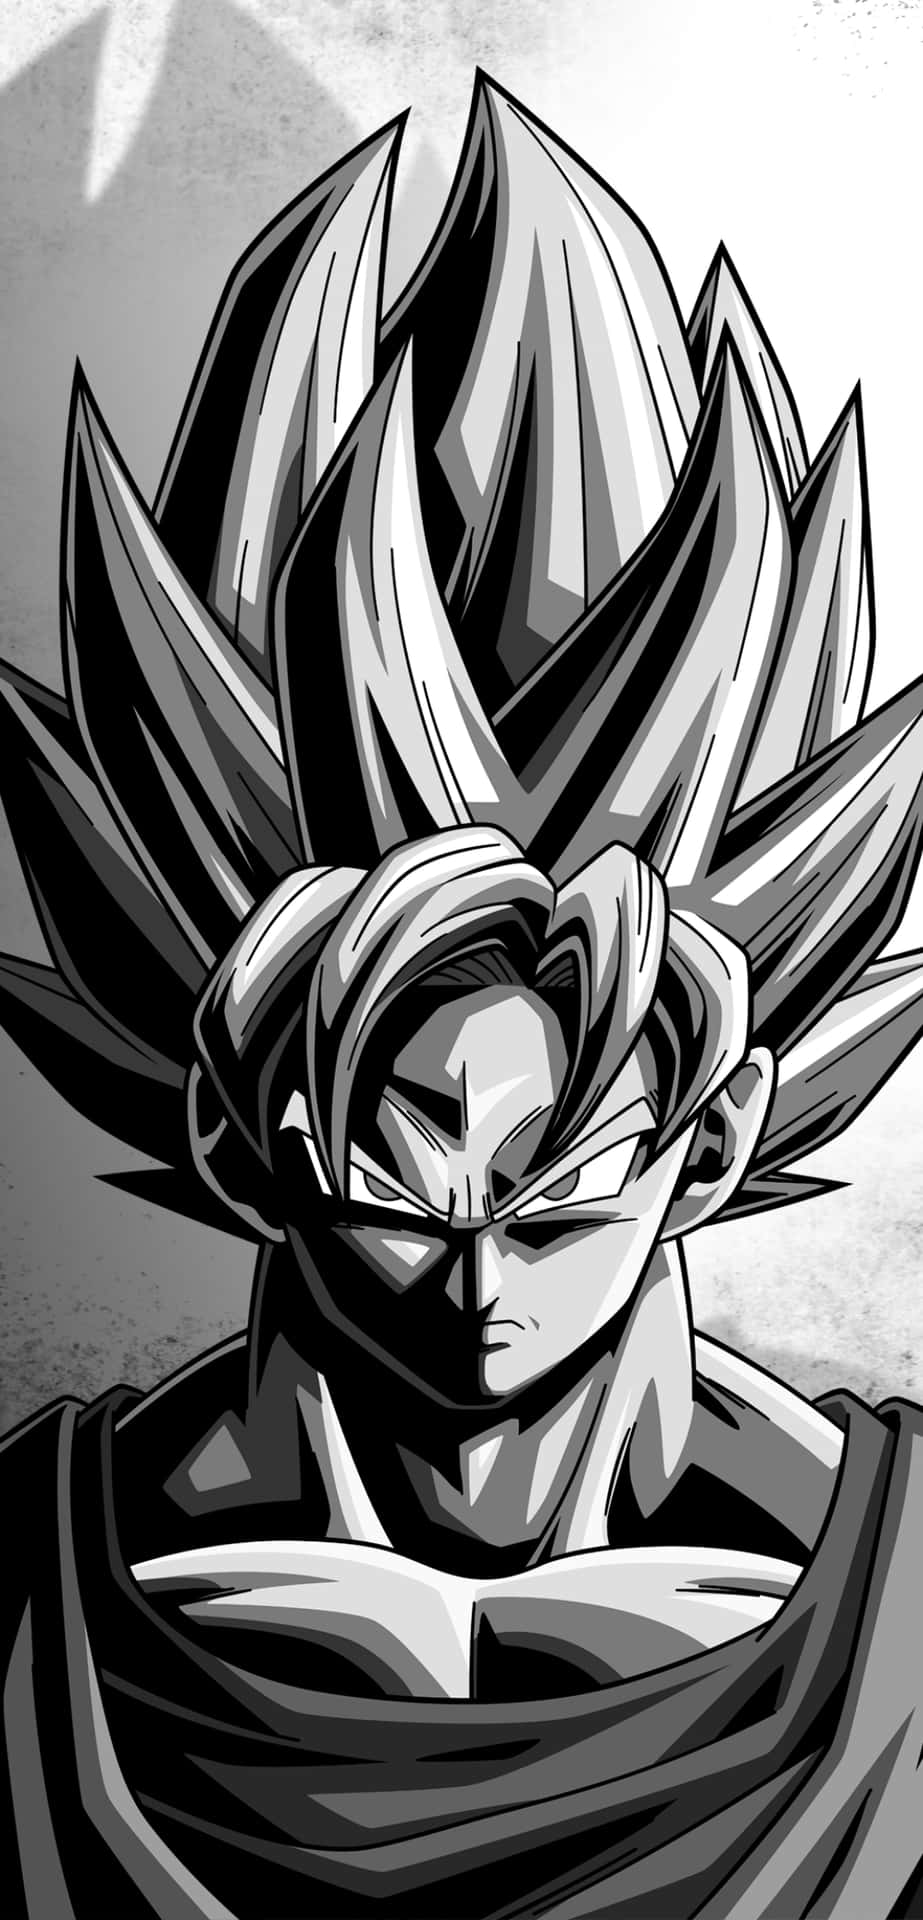 Super Saiyan Gohan battles with Cell in Epic Dragon Ball Black and White Duel Wallpaper